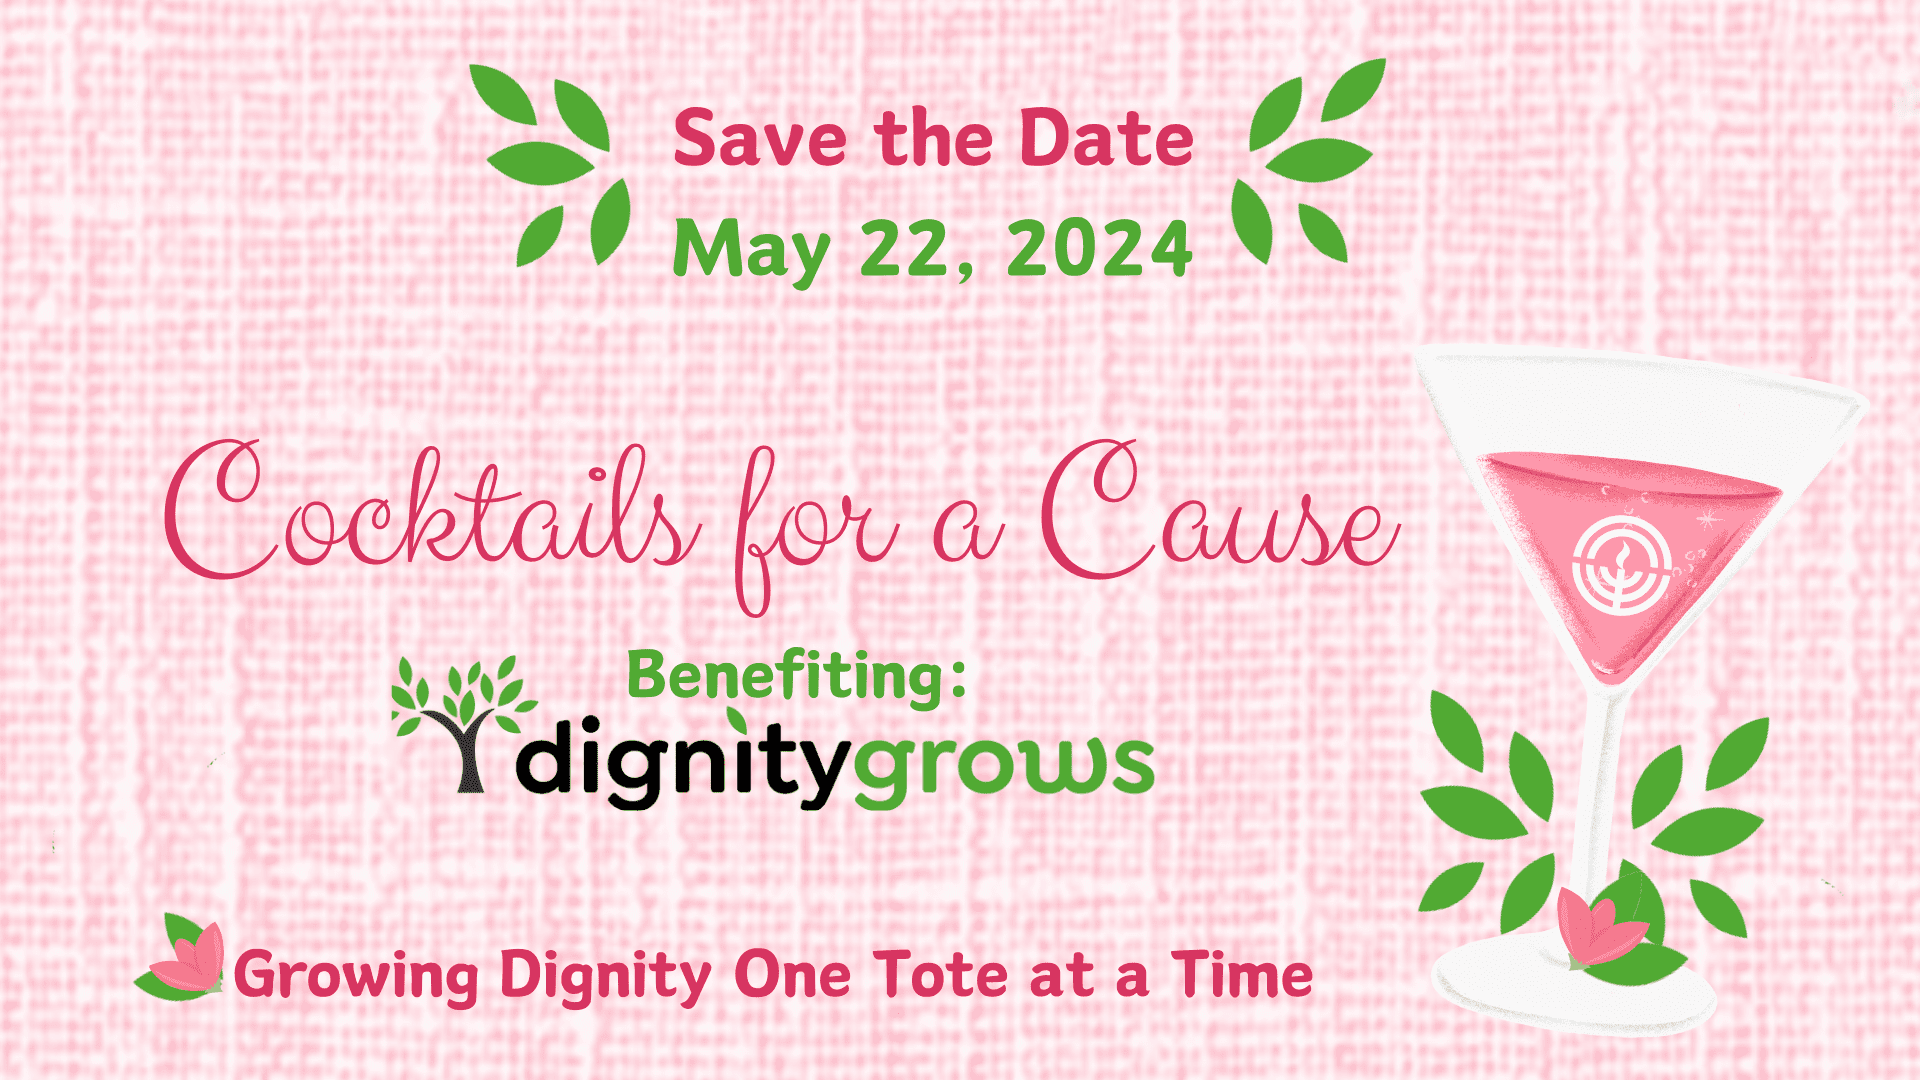 Save the date for Cocktails for a Cause on May 22, 2024.